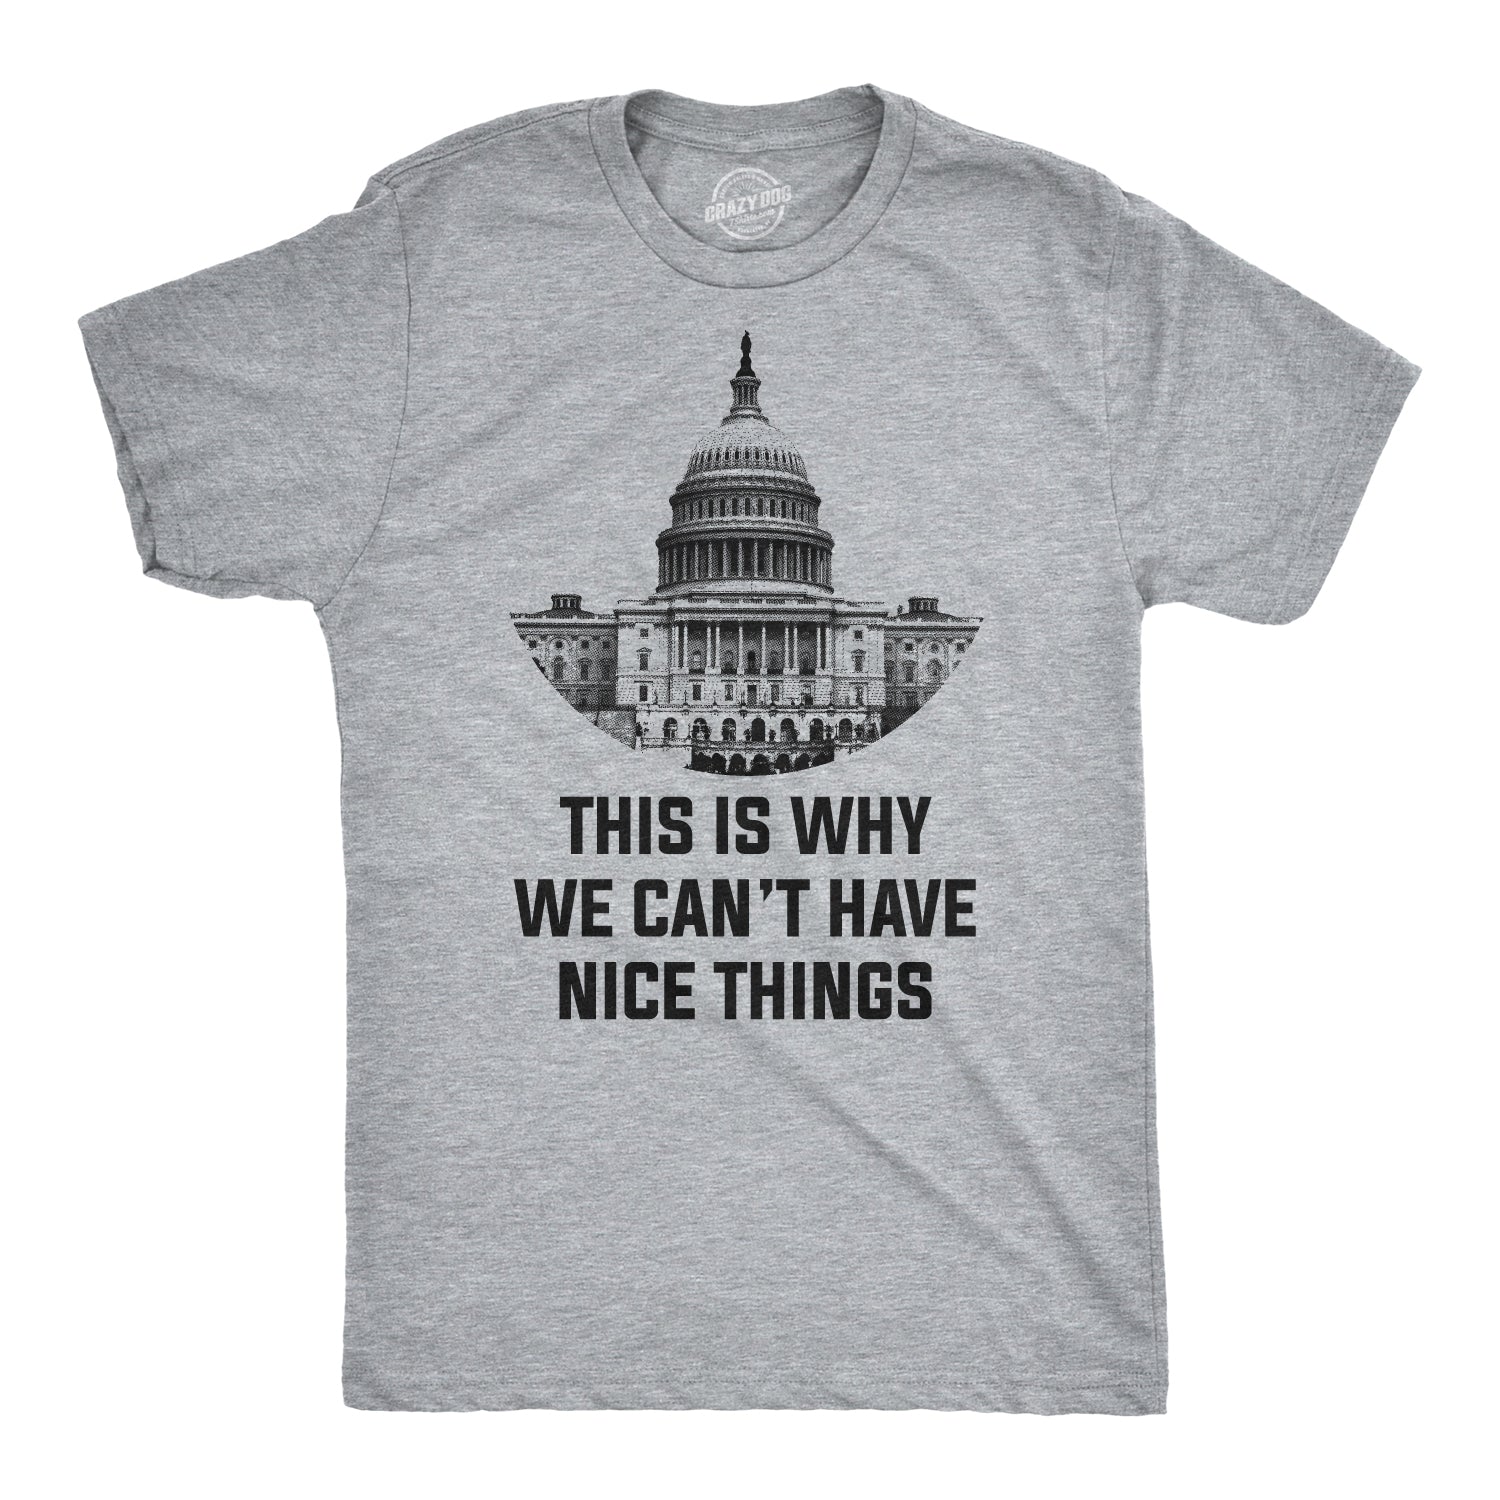 Funny Light Heather Grey This Is Why We Can't Have Nice Things Mens T Shirt Nerdy Political Tee